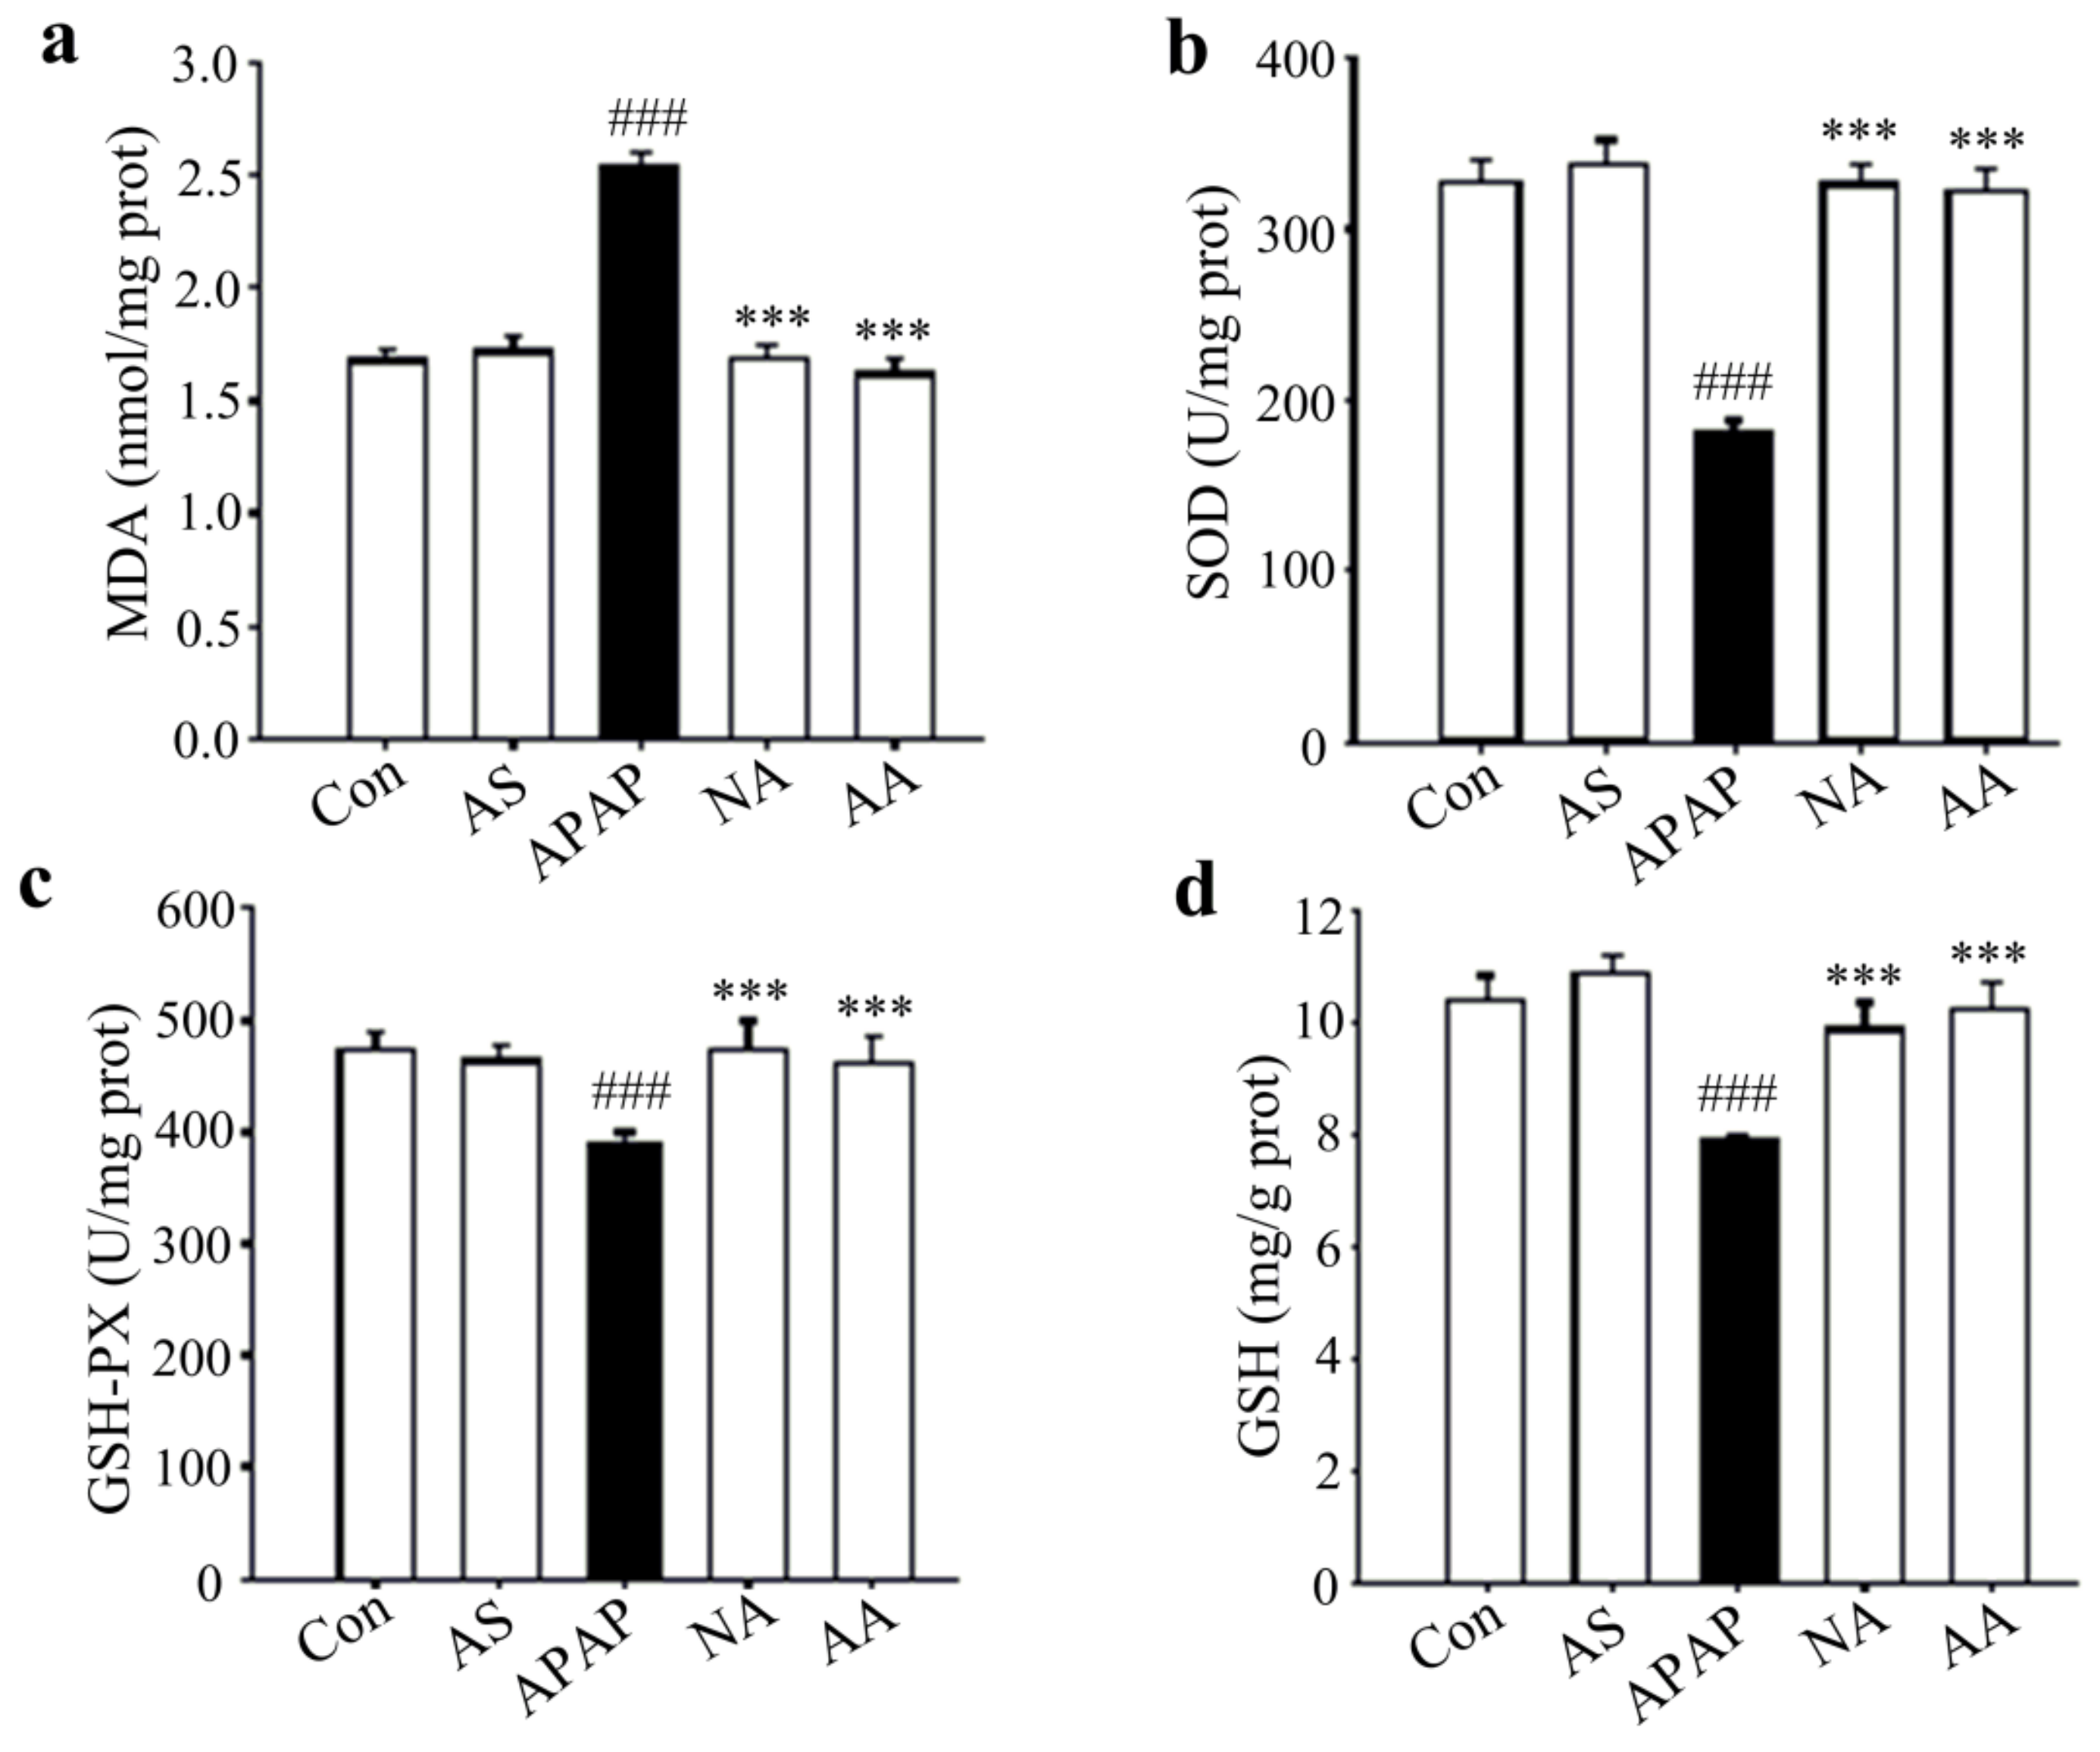 Molecules Free Full Text Auriculatone Sulfate Effectively Protects Mice Against Acetaminophen Induced Liver Injury Html